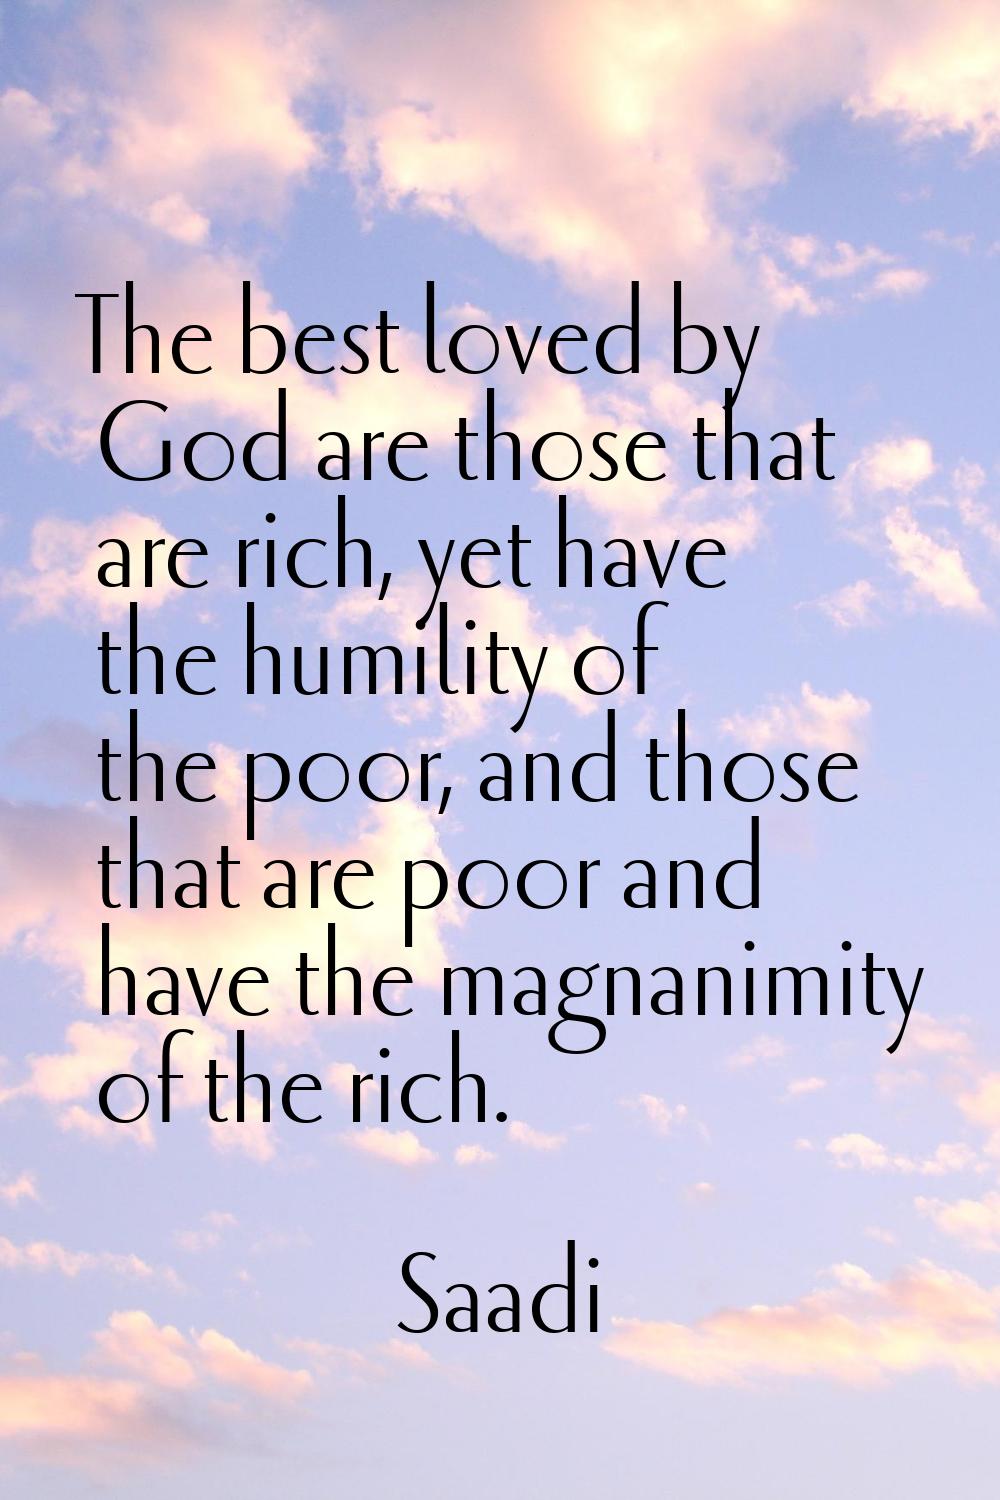 The best loved by God are those that are rich, yet have the humility of the poor, and those that ar